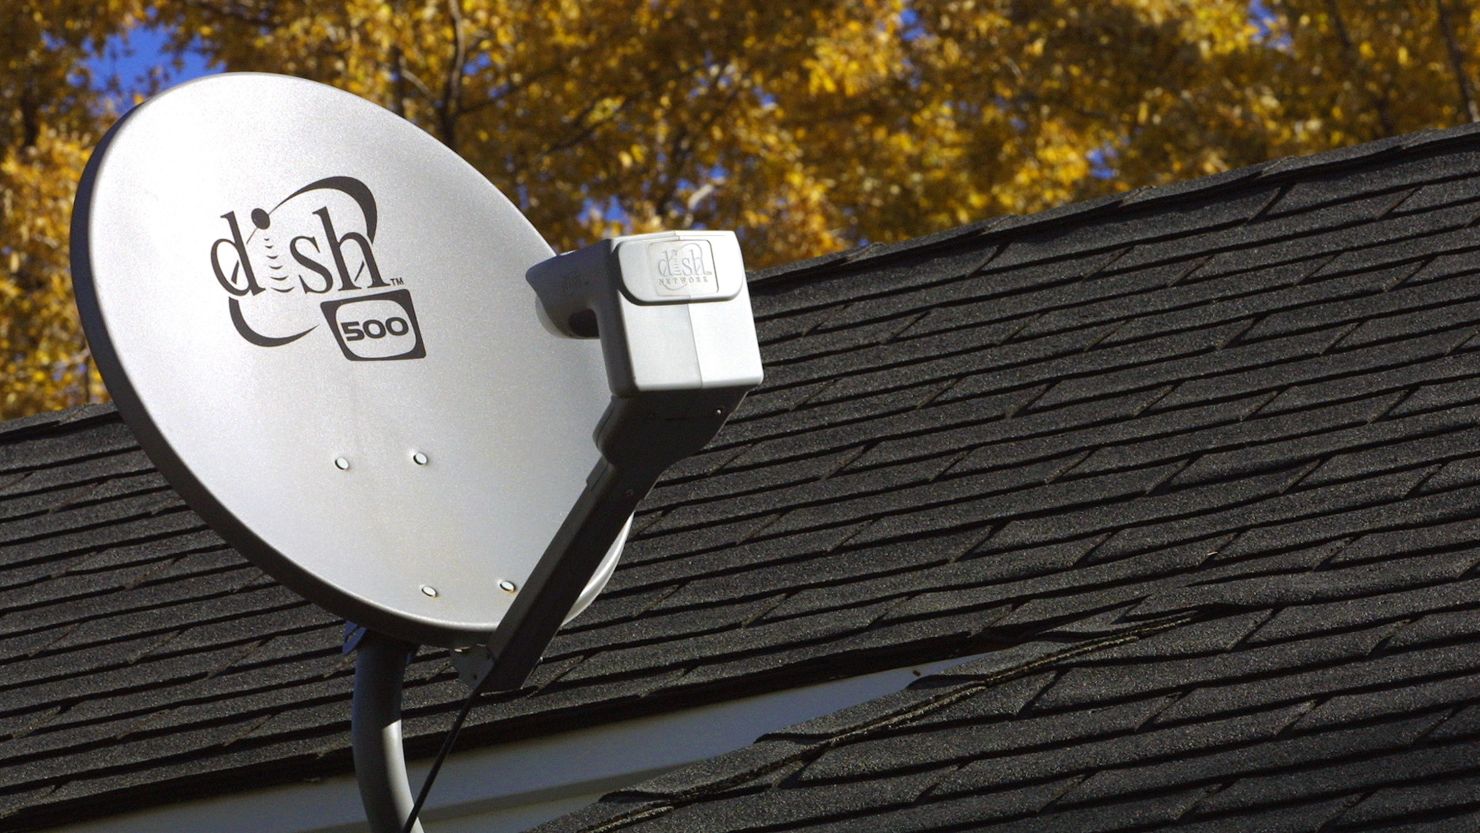 Dish Network has about 14 million satellite TV subscribers.